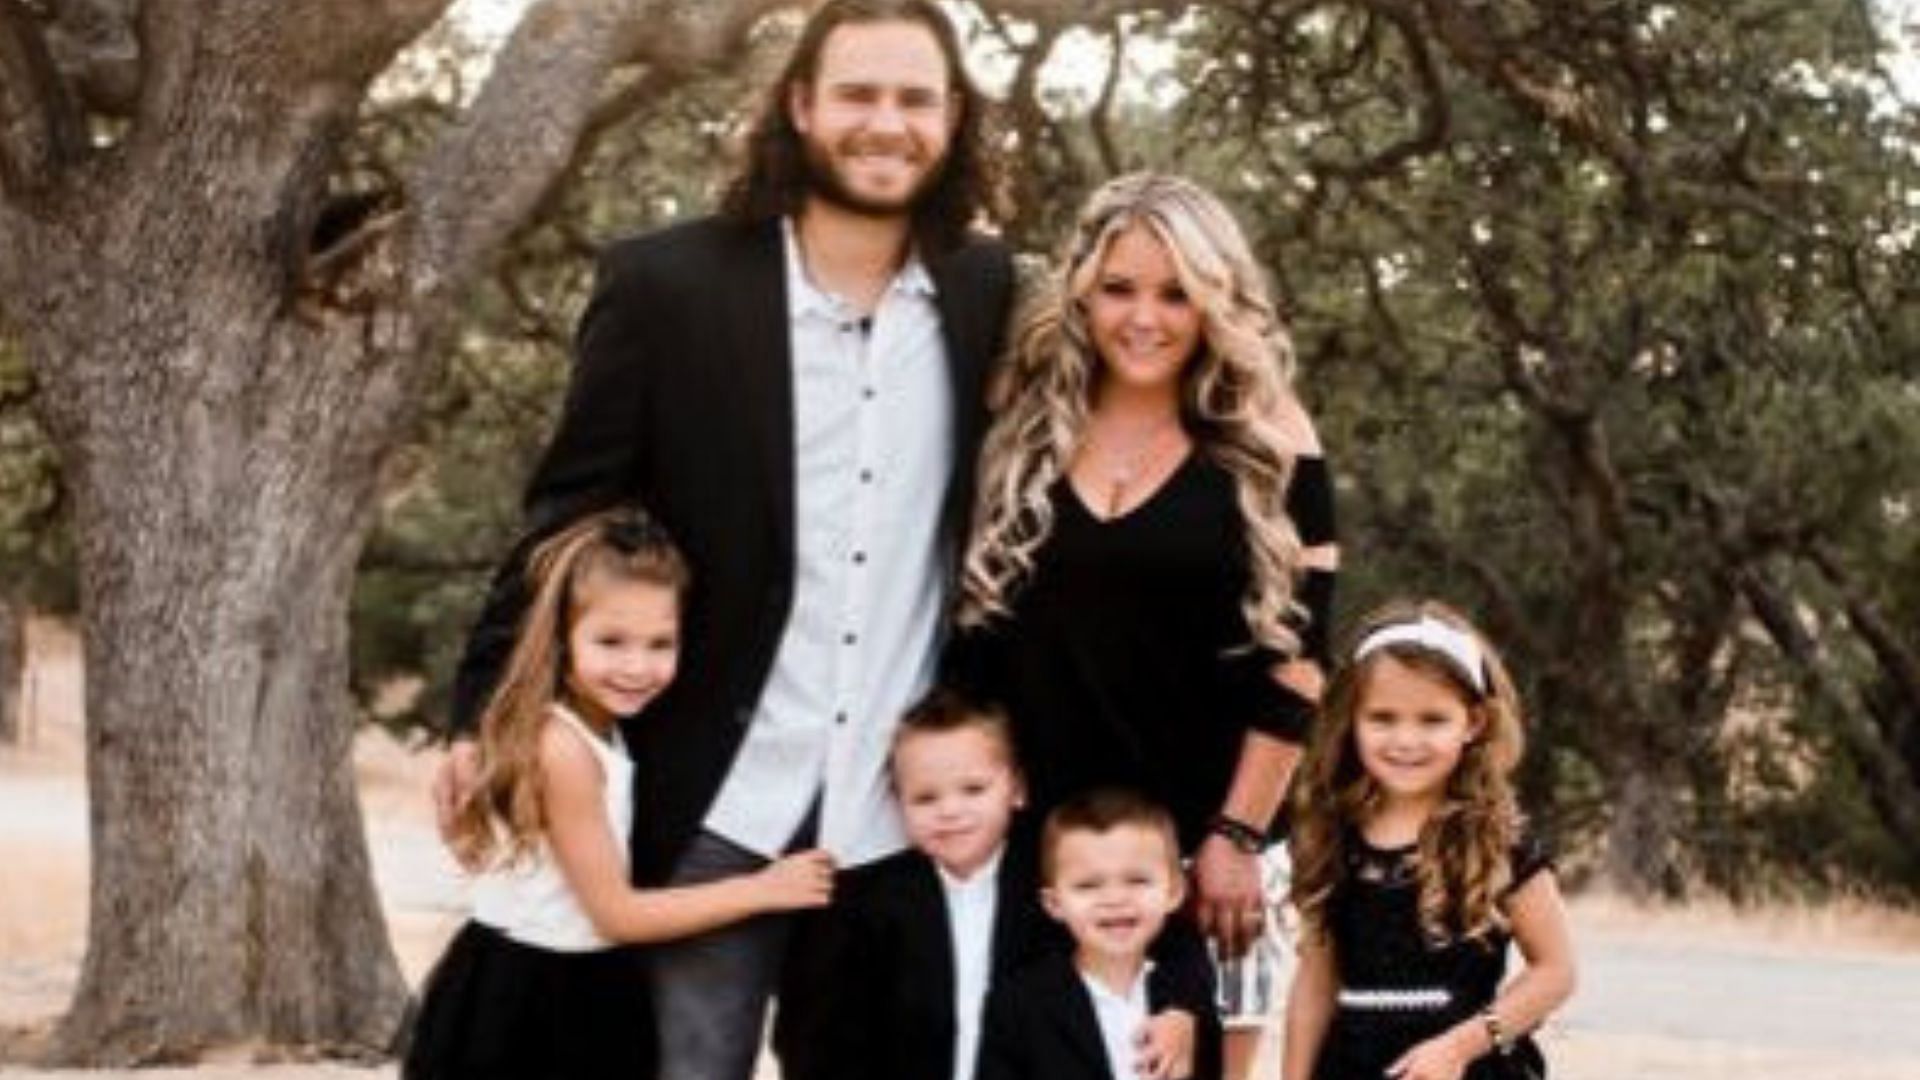 Brandon Crawford of the San Francisco Giants and Jalynne Crawford with their children